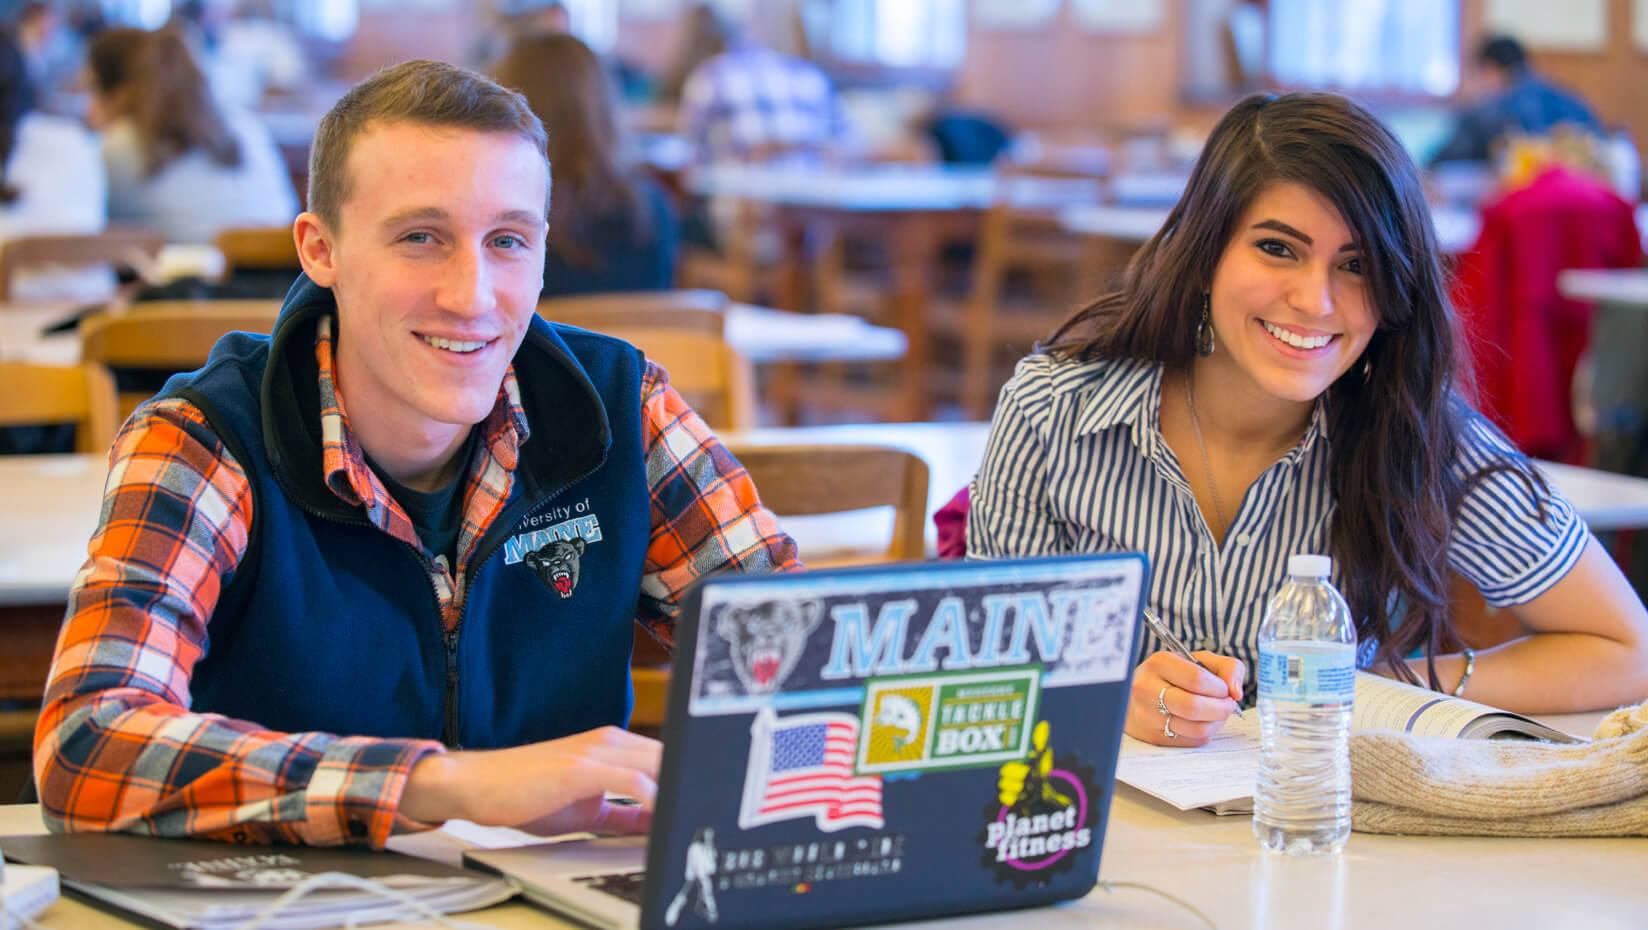 UMaine students in Fogler Library smiling with laptop